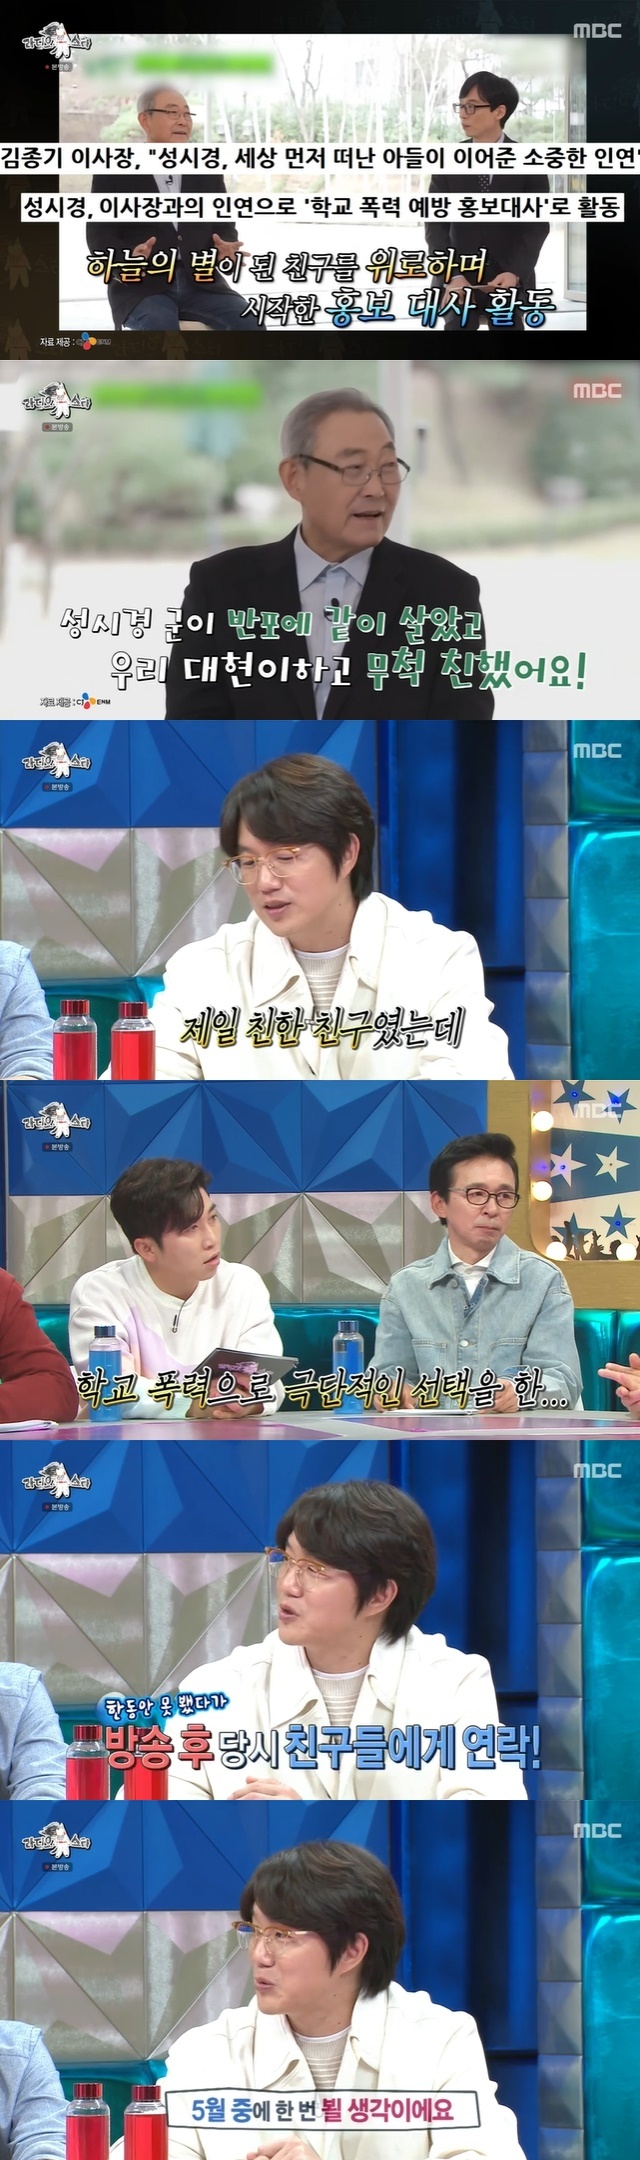 Singer Sung Si-kyong has expressed his complex mind toward Kim Jong-ki and Friends late Moonassi.MBC entertainment Radio Star (hereinafter referred to as Radio Star), which was broadcast on May 4, was featured as a guest by Taechang-inducing singer PSY, Sung Si-kyung, (girl) children Jeon So-yeon and Lee Seung-yoon in the 767th episode of the performance.On this day, Sung Si-kyung recently mentioned Kim Jong-ki, honorary chairman of the Blue Tree Foundation, who appeared on TVN entertainment Yu Quiz on the Block and his son, Moonassi.At the time of the broadcast, Kim Jong-ki was informed that his son, Moonassi, and Sung Si-kyung, were close friends during their school days, and Sung Si-kyung took charge of the foundations public relations ambassador.Sung Si-kyung said, (Chairman Kim Jong-ki) just appeared on the air.I dont think I ever talked to him on the air, he said, and (the late Moonassi military) was my best friend, he recalled carefully.PSY also did not hide its complex expression as he knew the story well as the second year of Sung Si-kyung, the late Moonassi.Sung Si-kyung said, I and Daehyun were the best friends, but hell happened and my father was an executive of a large corporation.Our time was widespread, but until then there was no word of school violence. It came to the surface. It was an effort to be done, but my father gave up and came all in. Friends gathered at this Friend (the late Moonassi County) birthday and visited my father, and at some point I was actually too troubled.Because when the friends come to the growing children who forget and overcome, they are grateful and tearful.I have not been able to visit you recently, but I have seen you on the air recently, and there is a Friend chat room. I will visit you in May. 